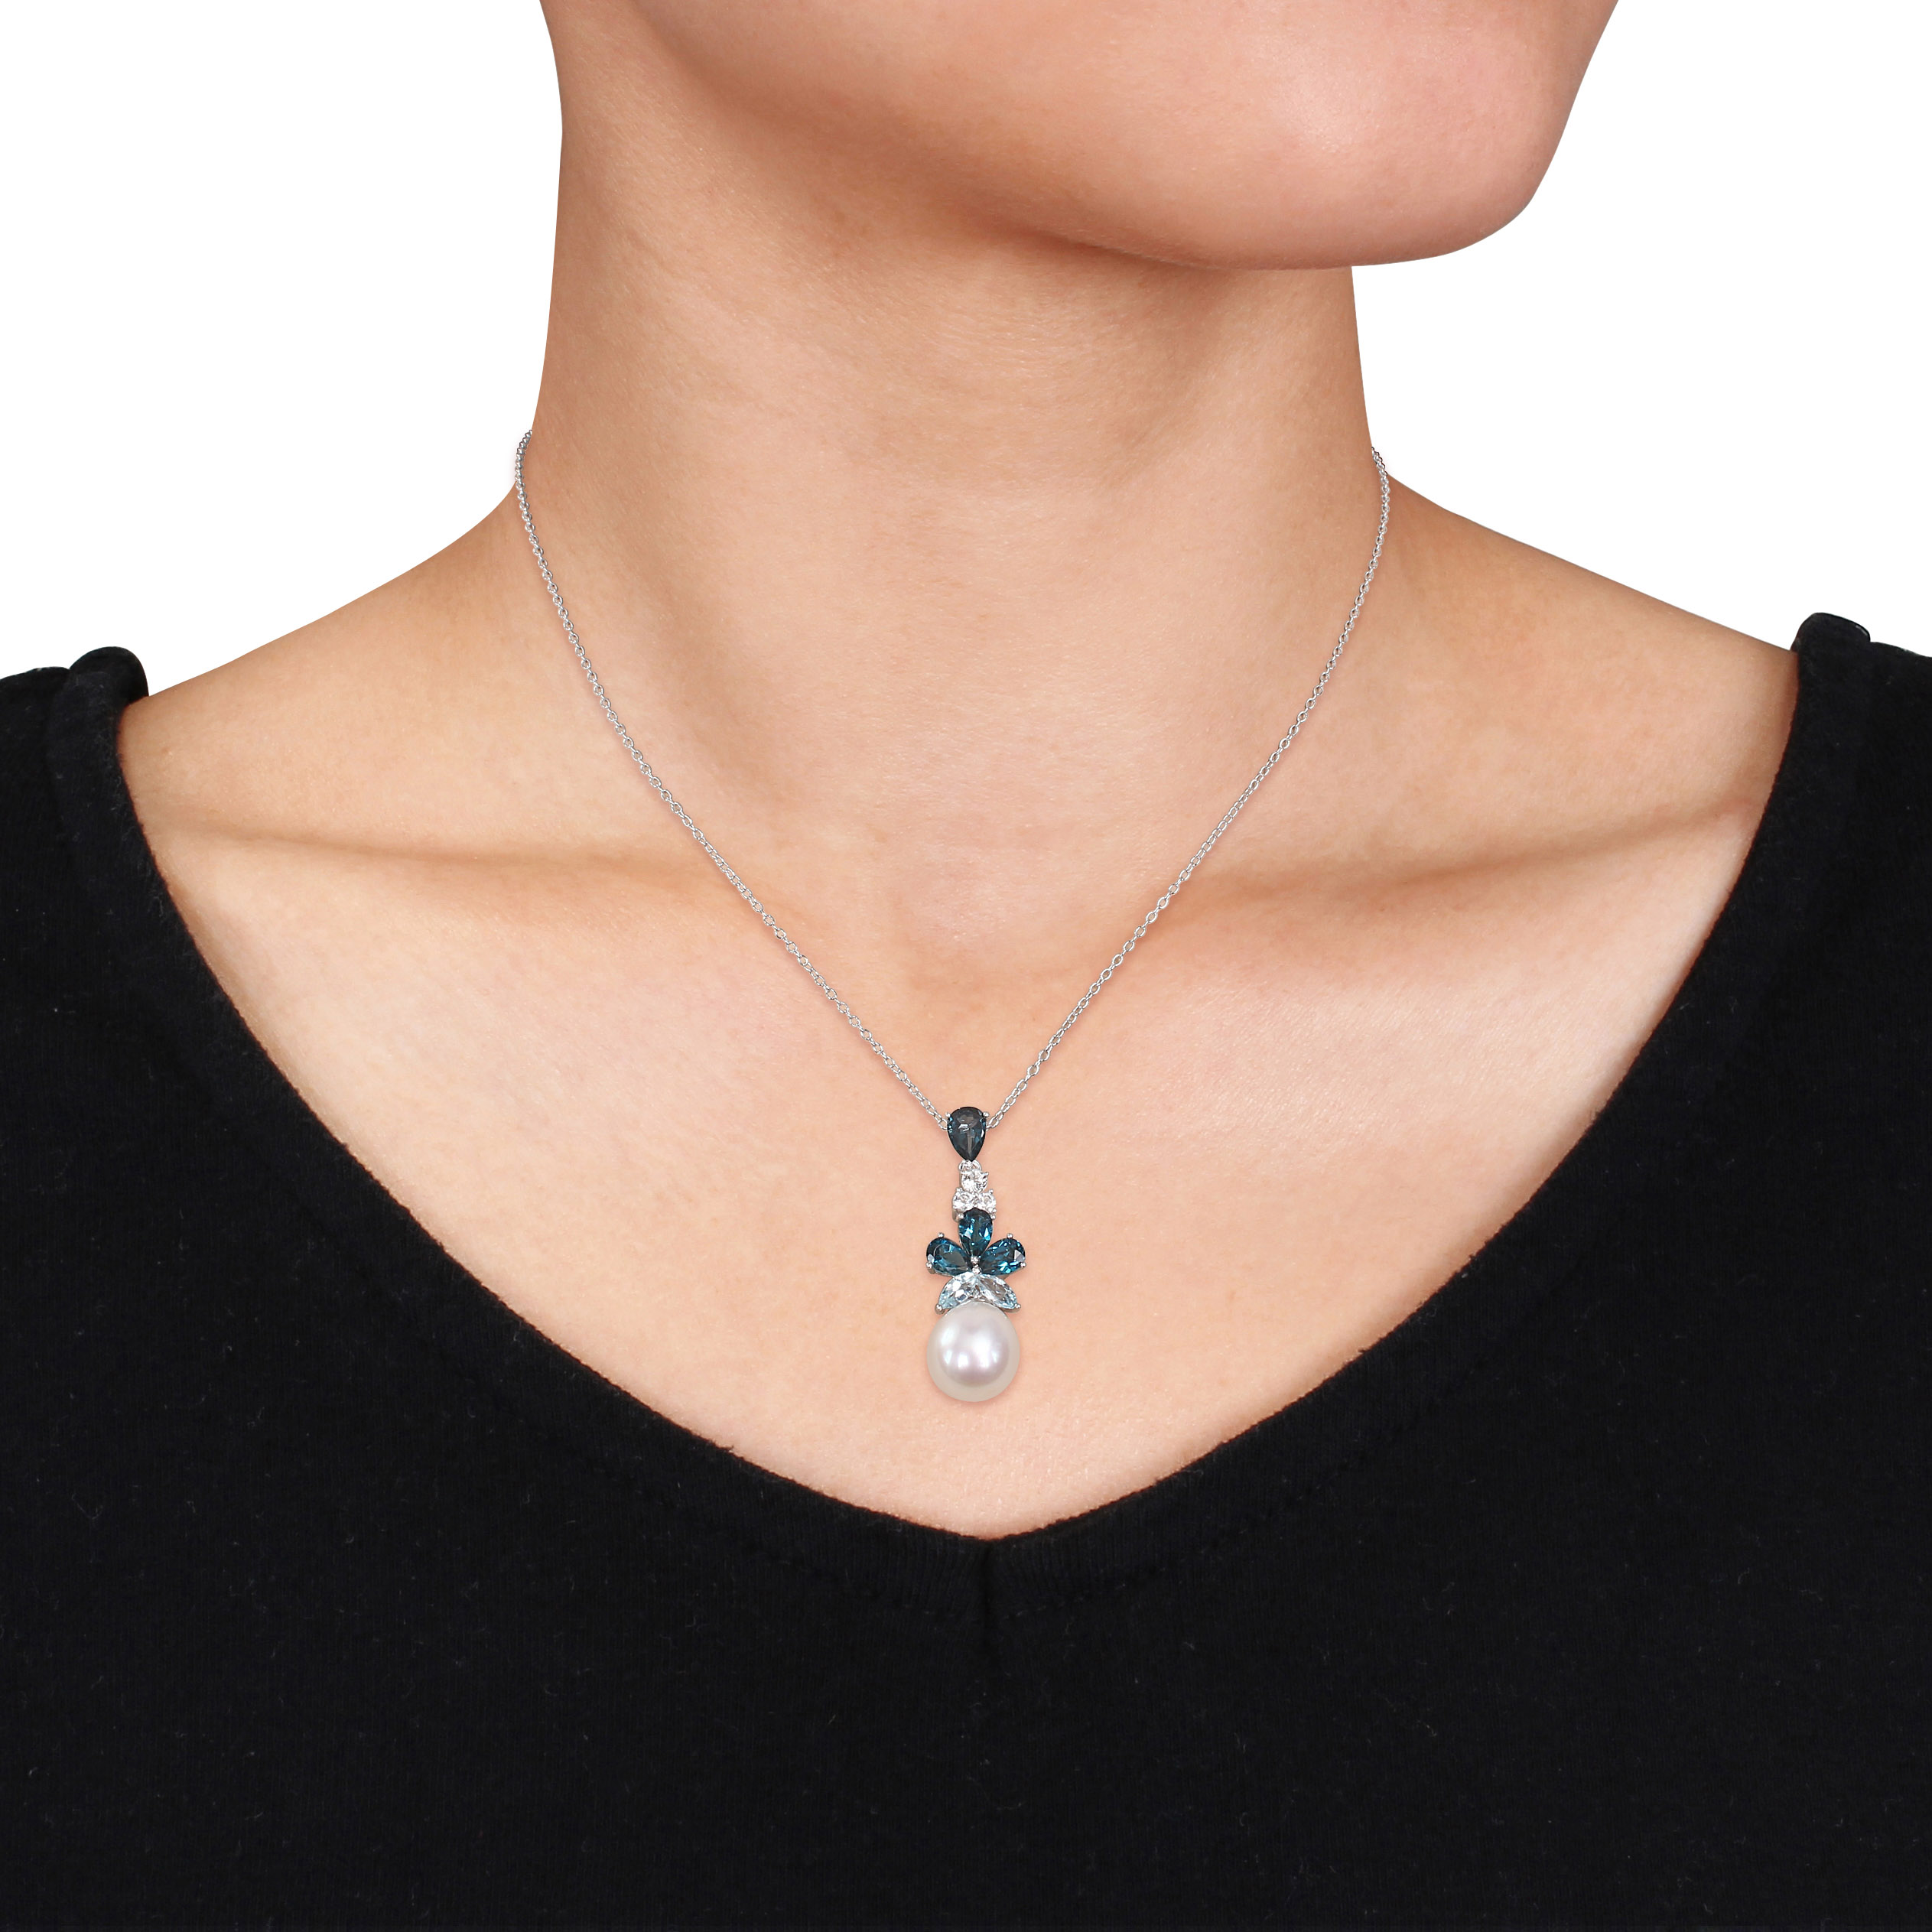 3 1/4 CT TGW London, Sky Blue and White Topaz and 9.5 - 10 MM White Cultured Freshwater Pearl Drop Pendant with Chain in Sterling Silver